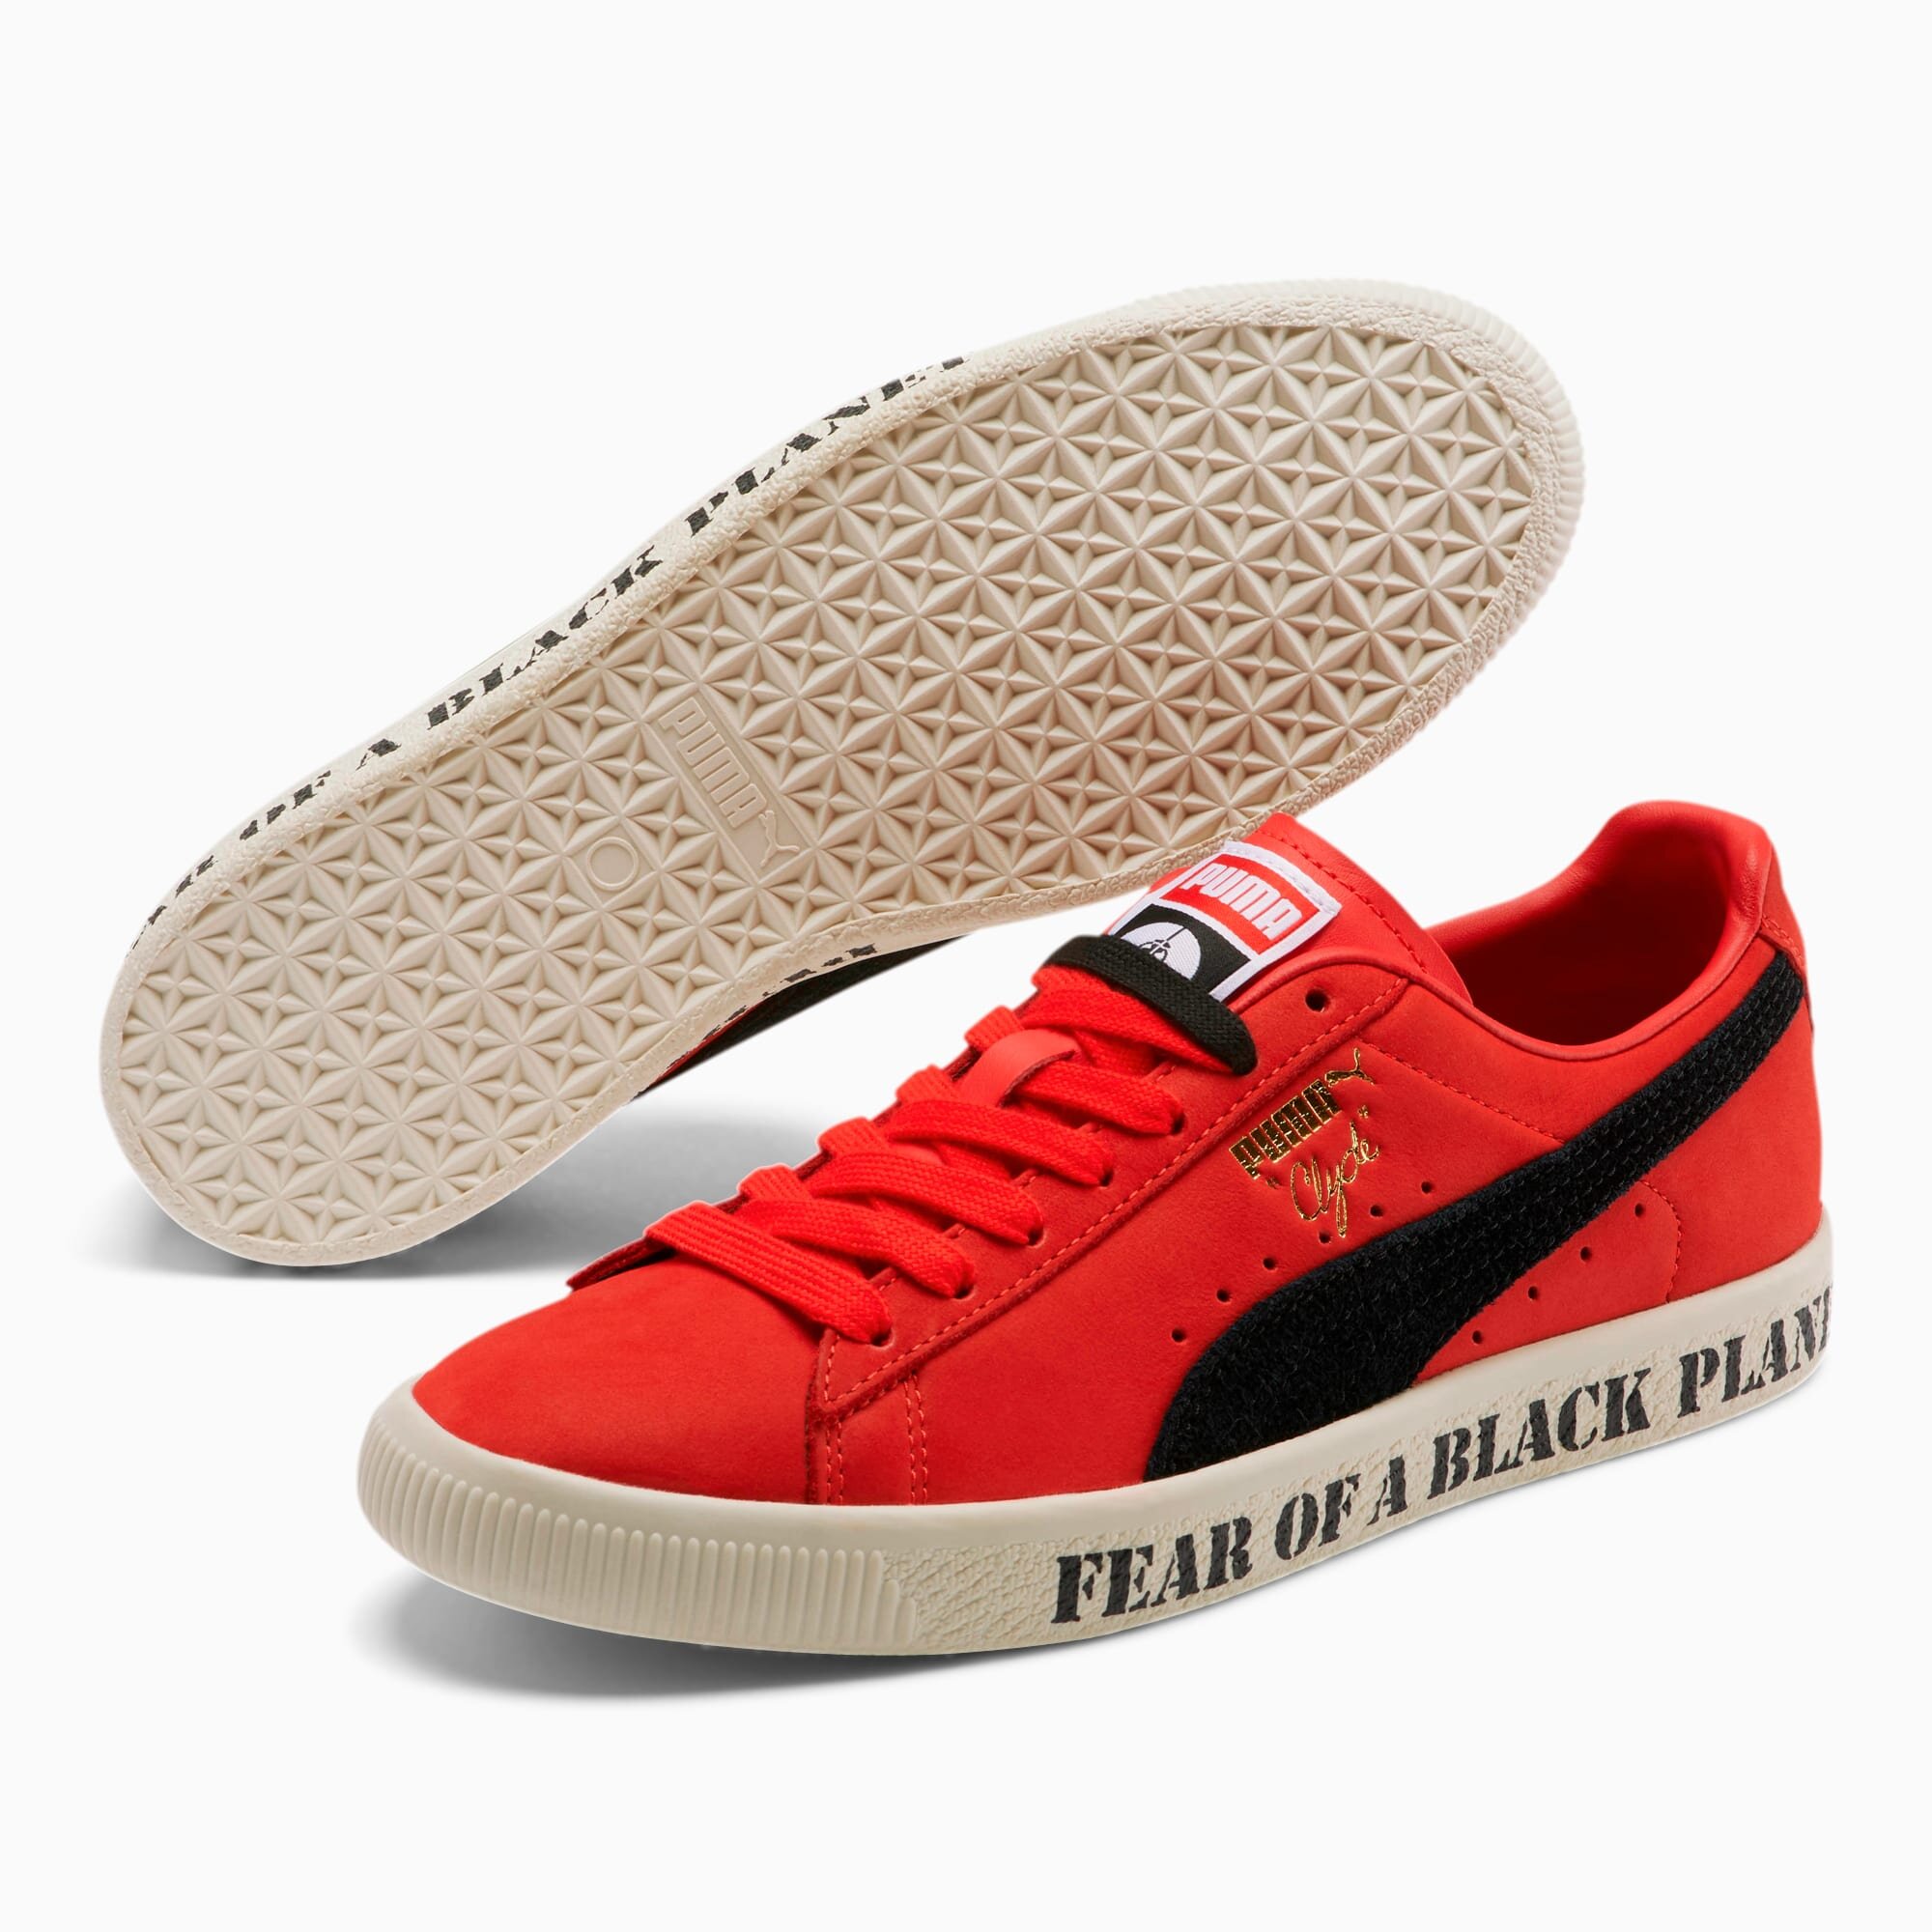 puma clyde sneakers